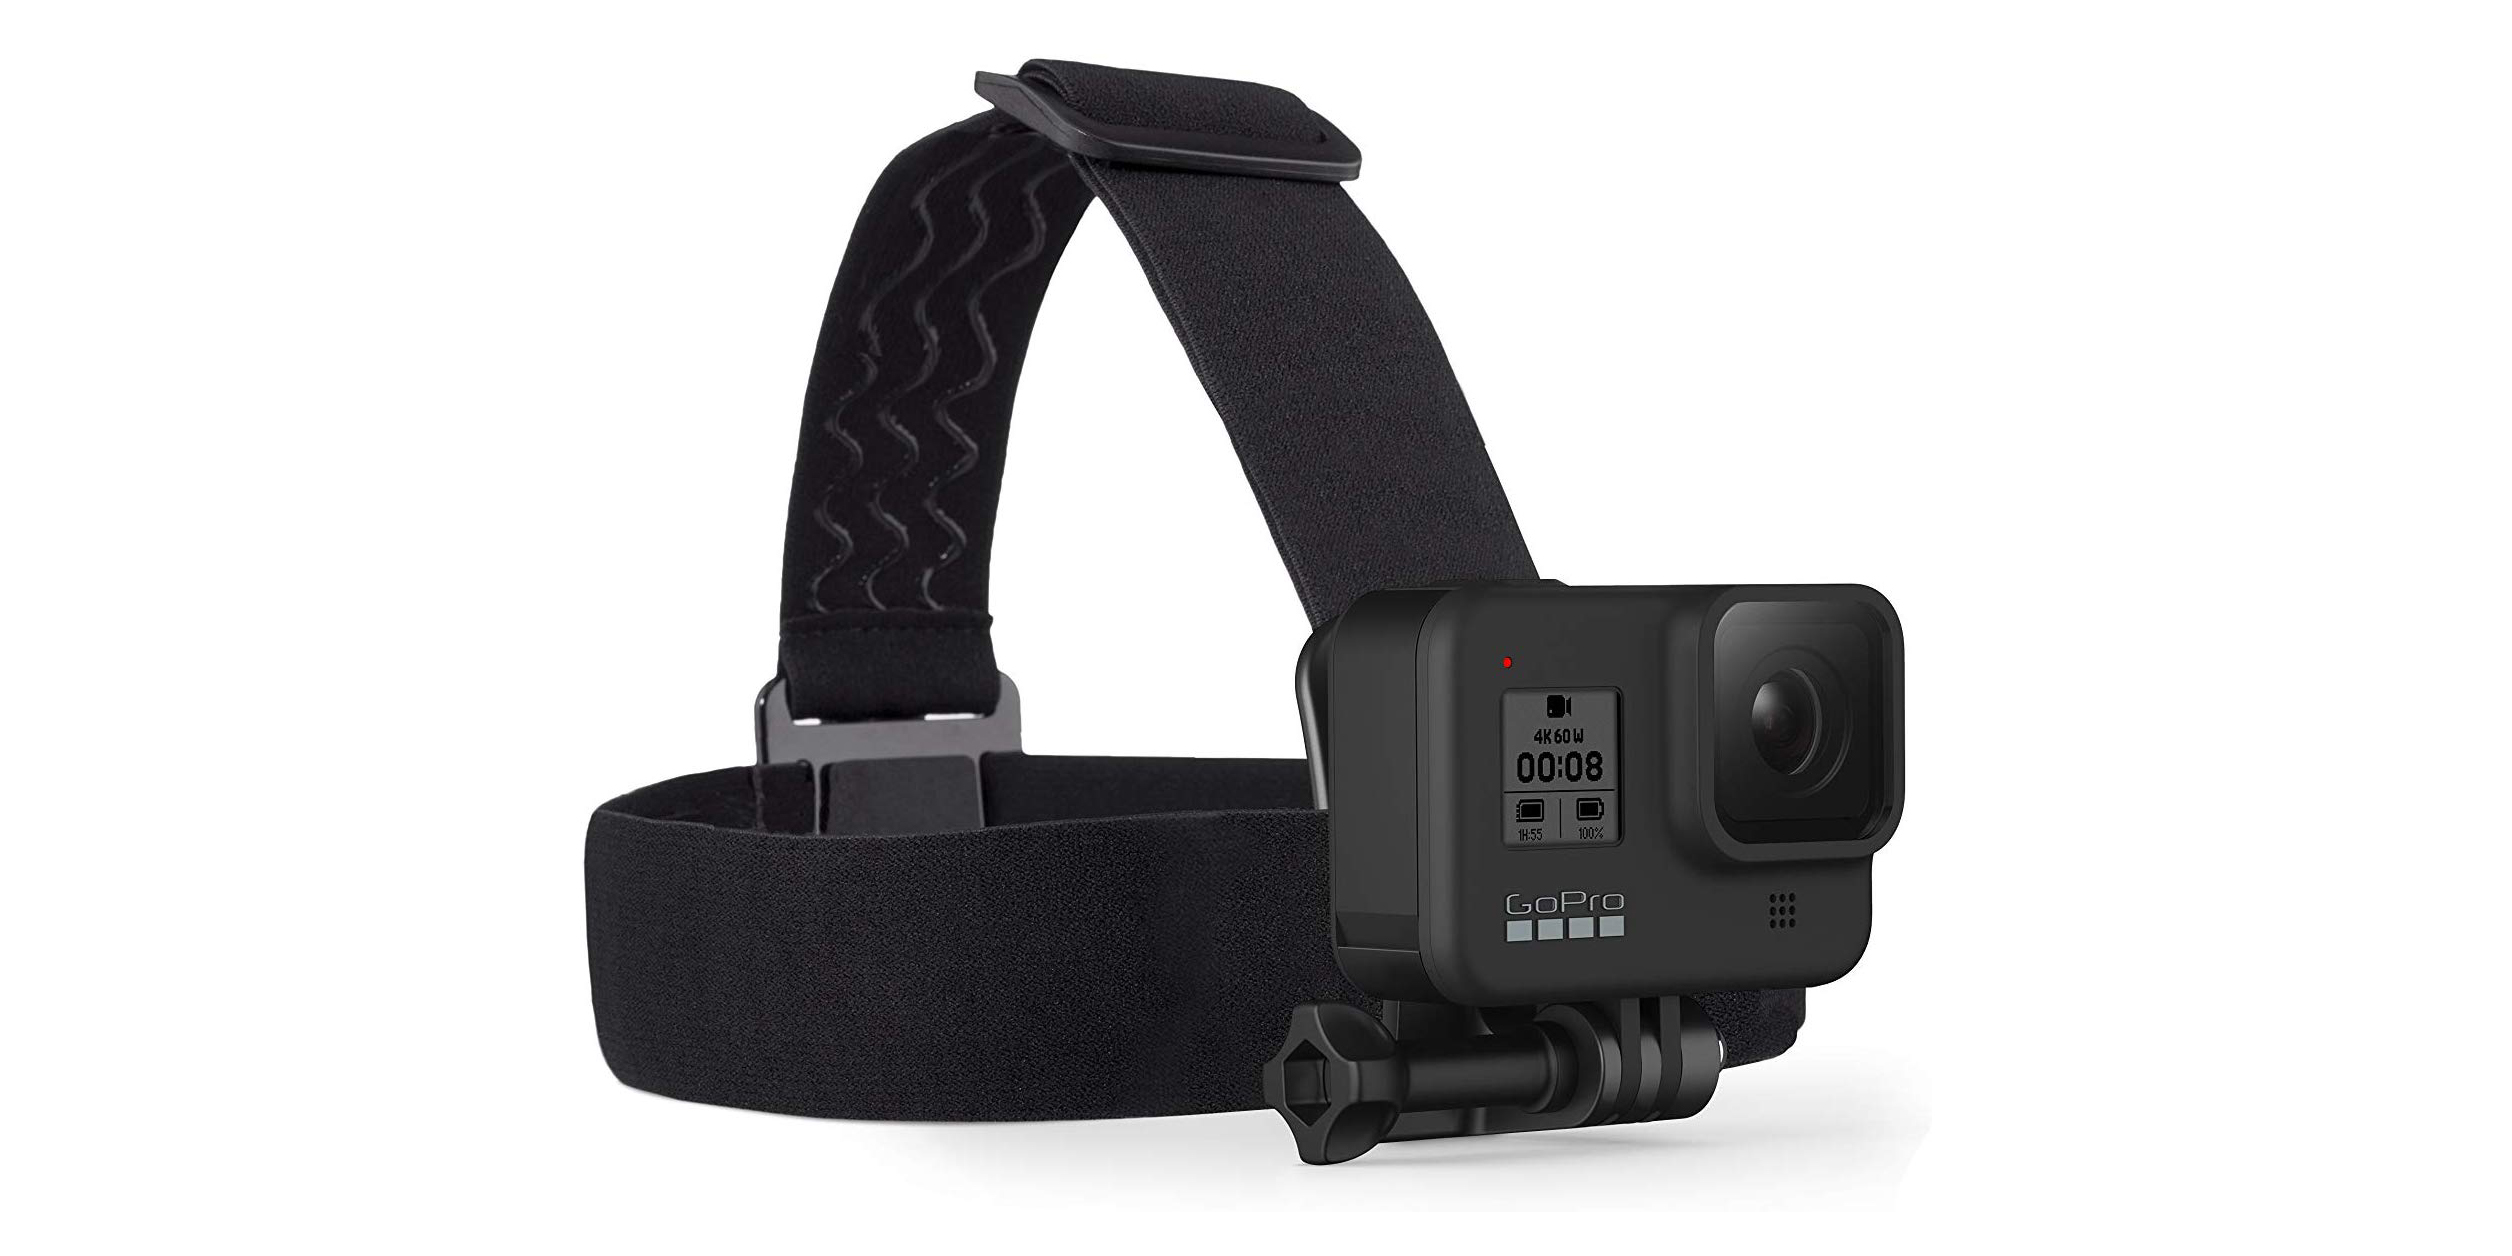 GoPro HERO8 Black with added accessories is $ for Black Friday